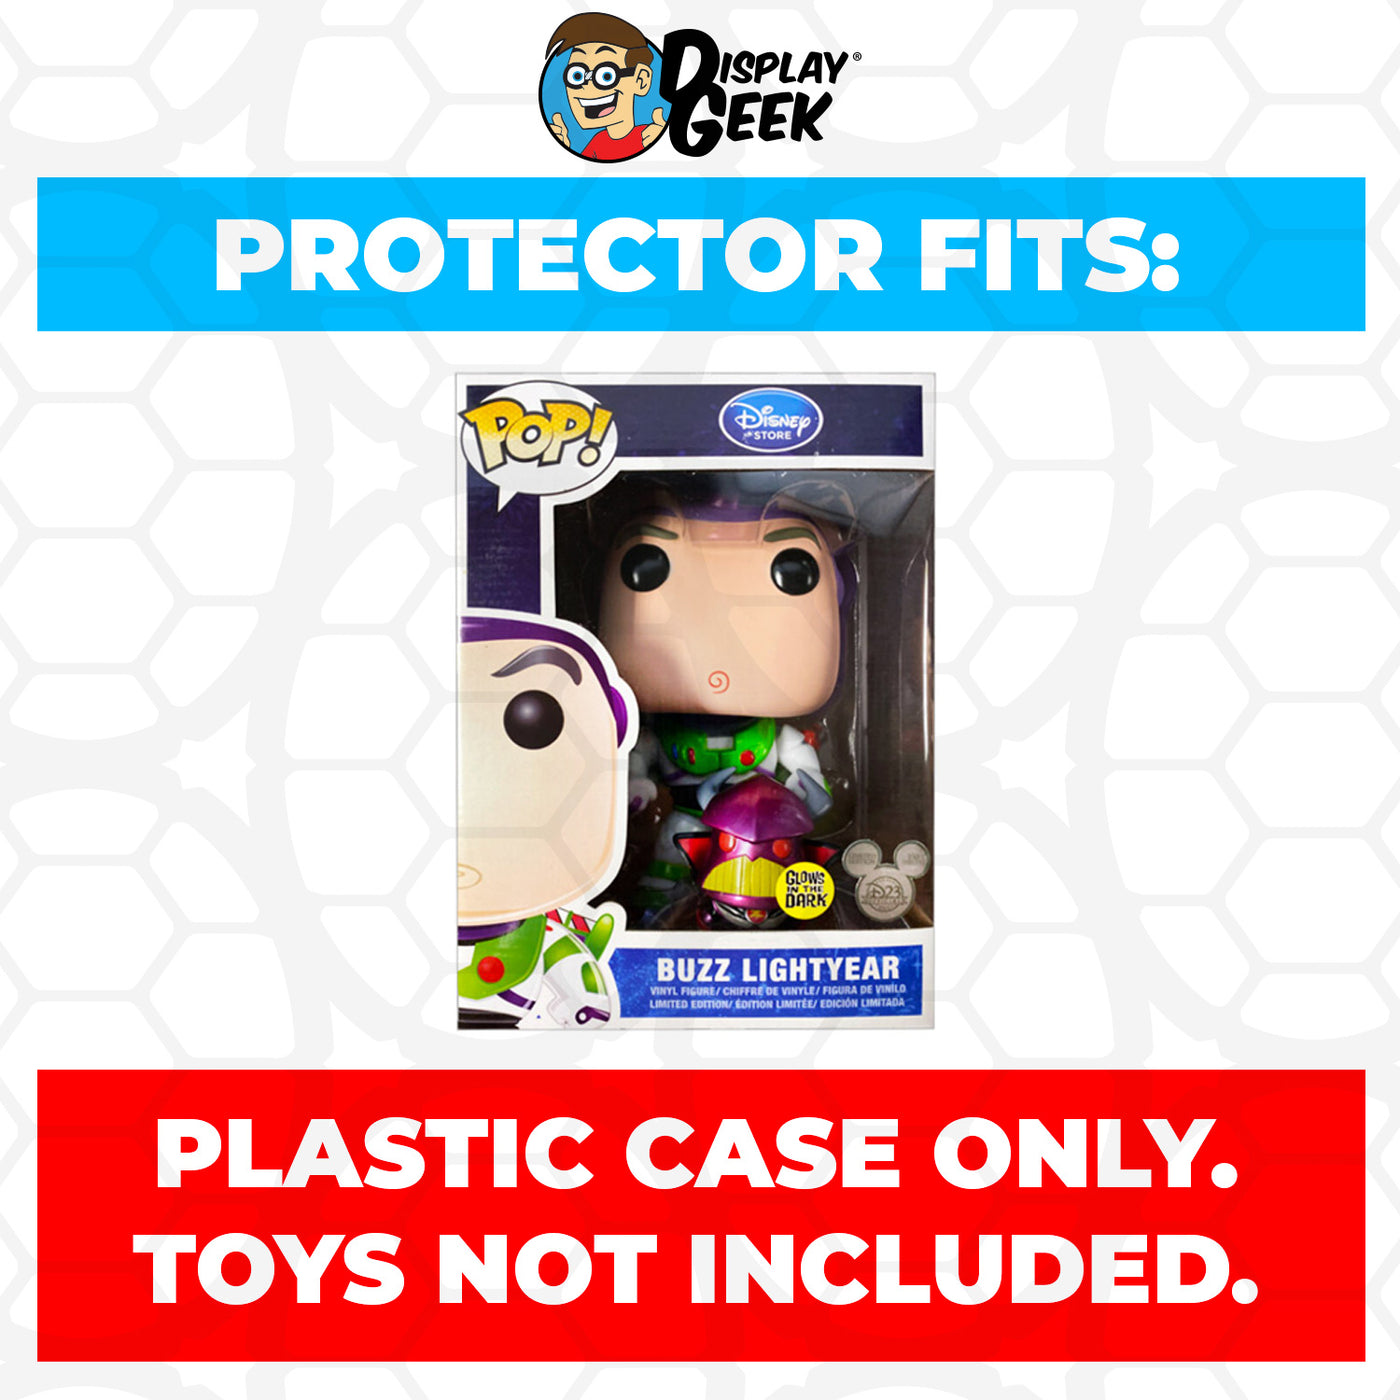 Pop Protector for 9 inch Giant Buzz Lightyear with Zurg Glow D23 Expo Funko Pop on The Protector Guide App by Display Geek